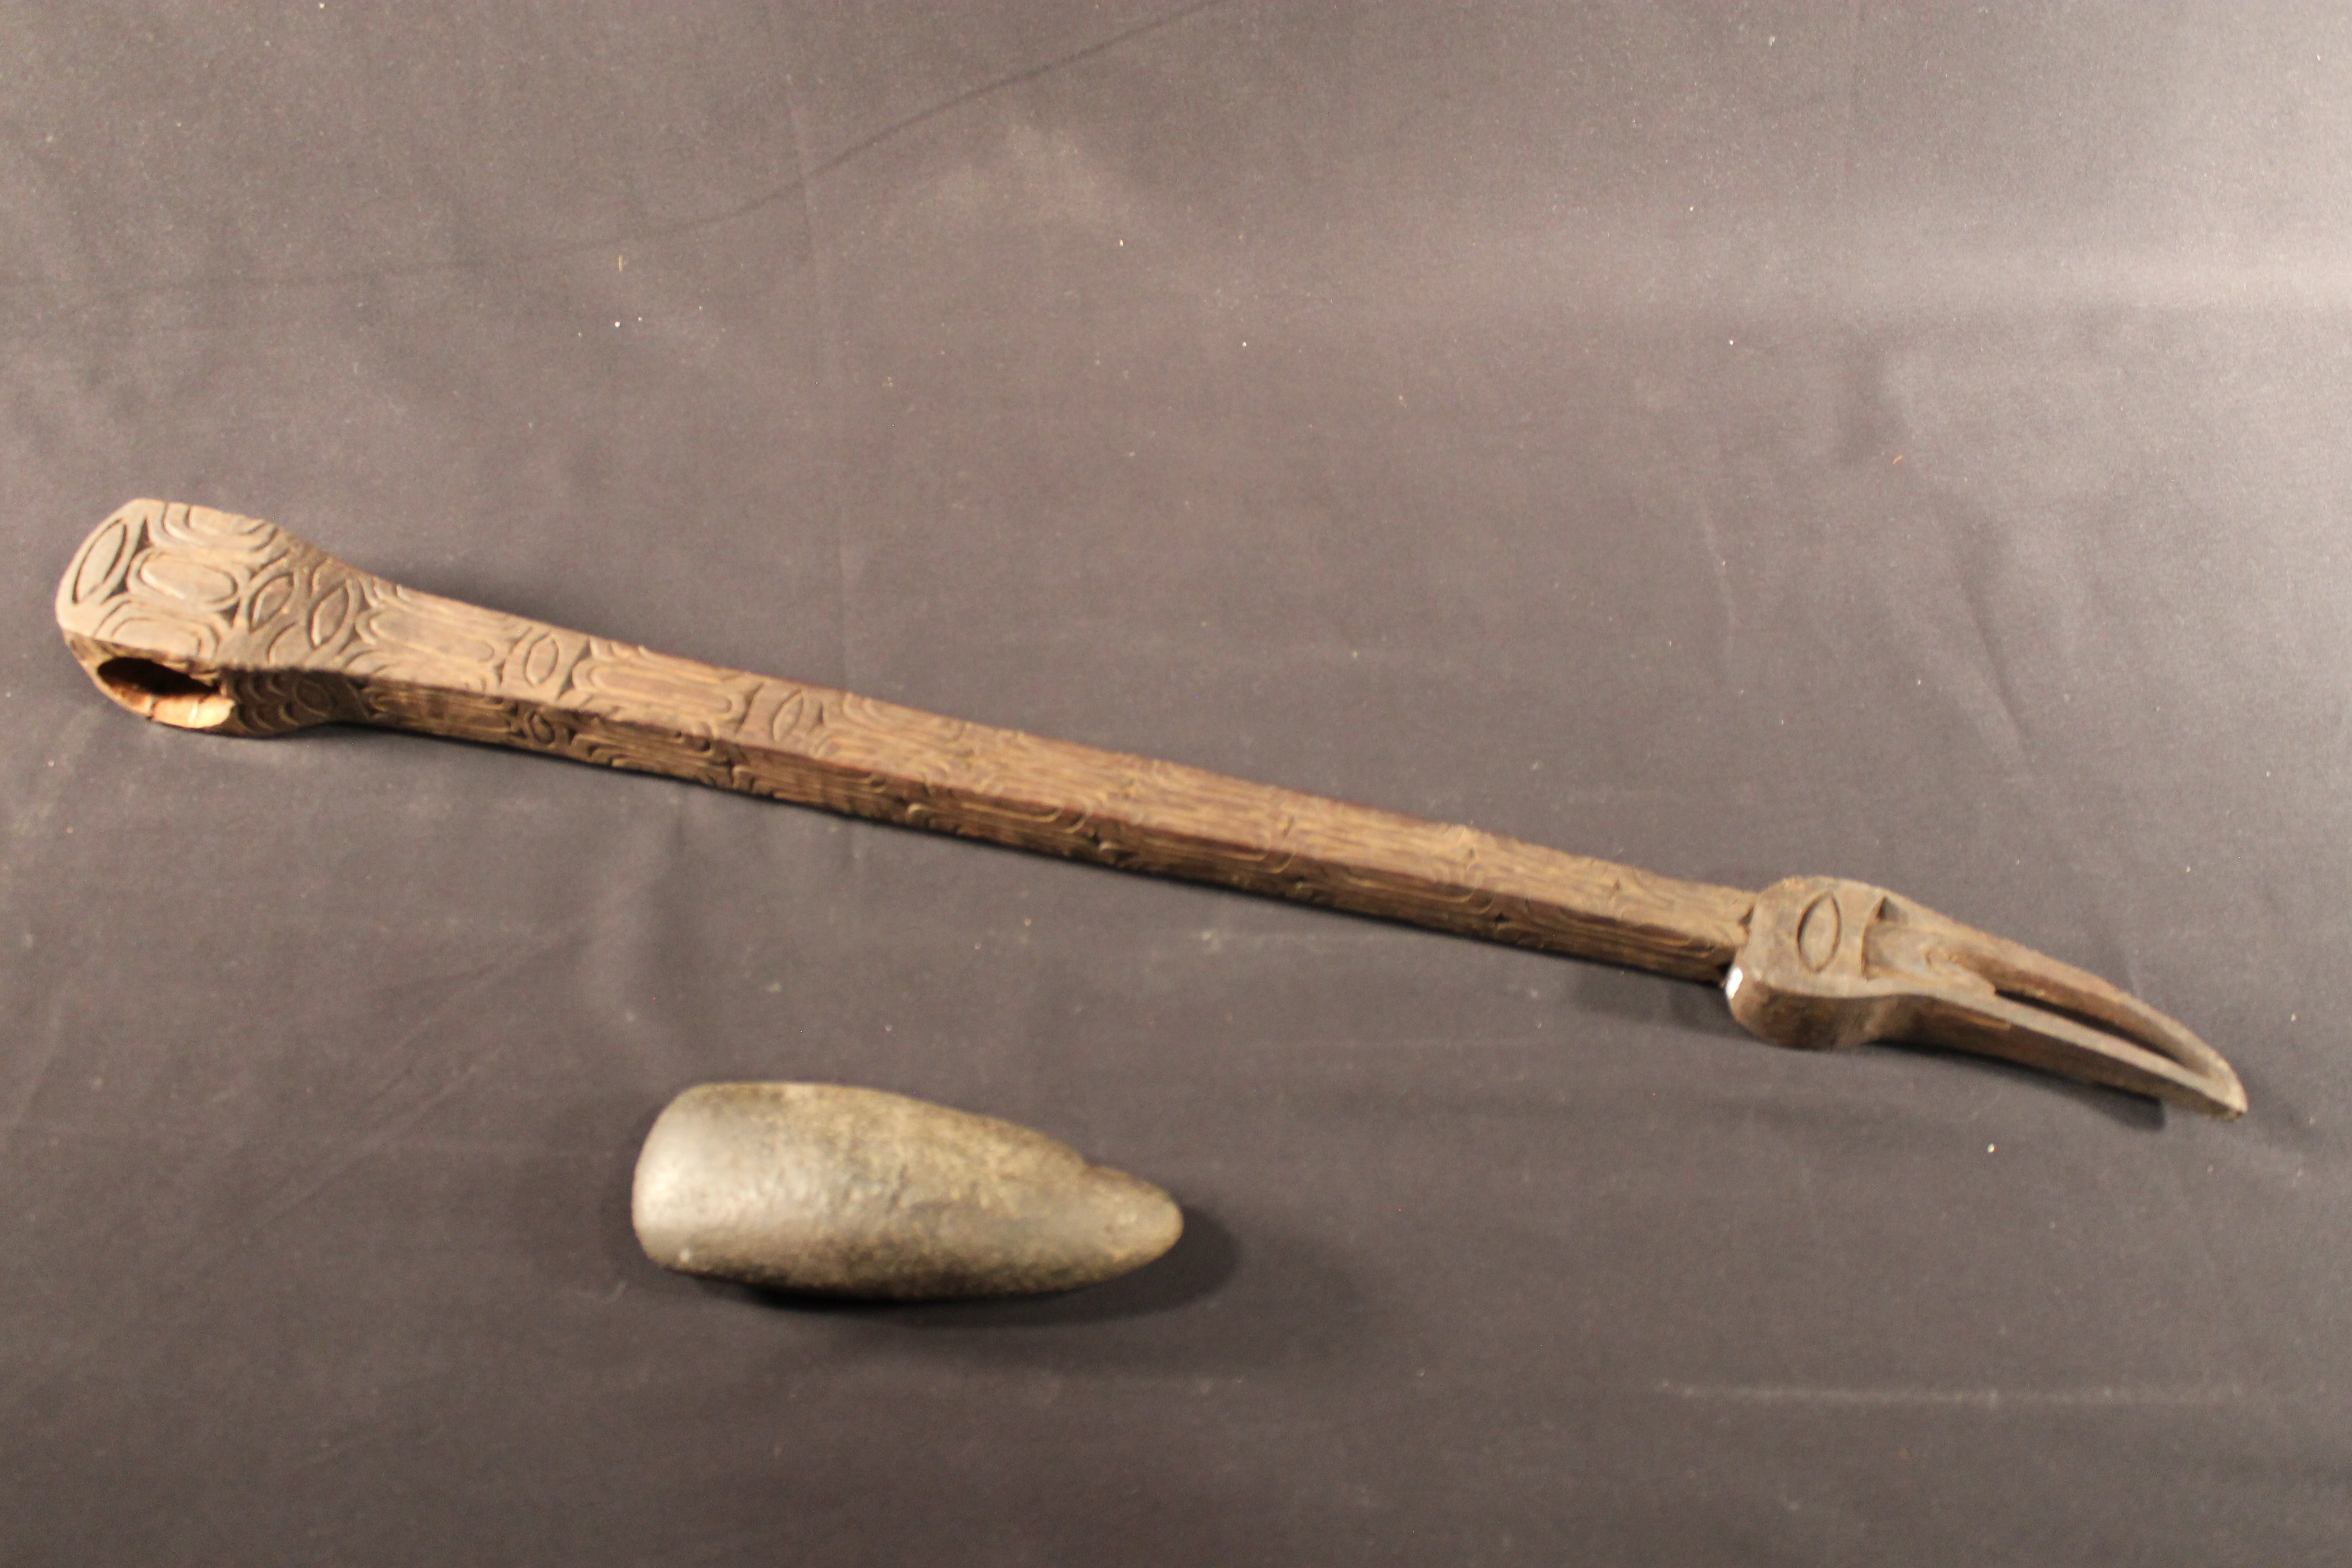  Stone blade ax with decorated handle. The handle has designs of frog legs, jungle fruit, and a hornbill bird’s head. 